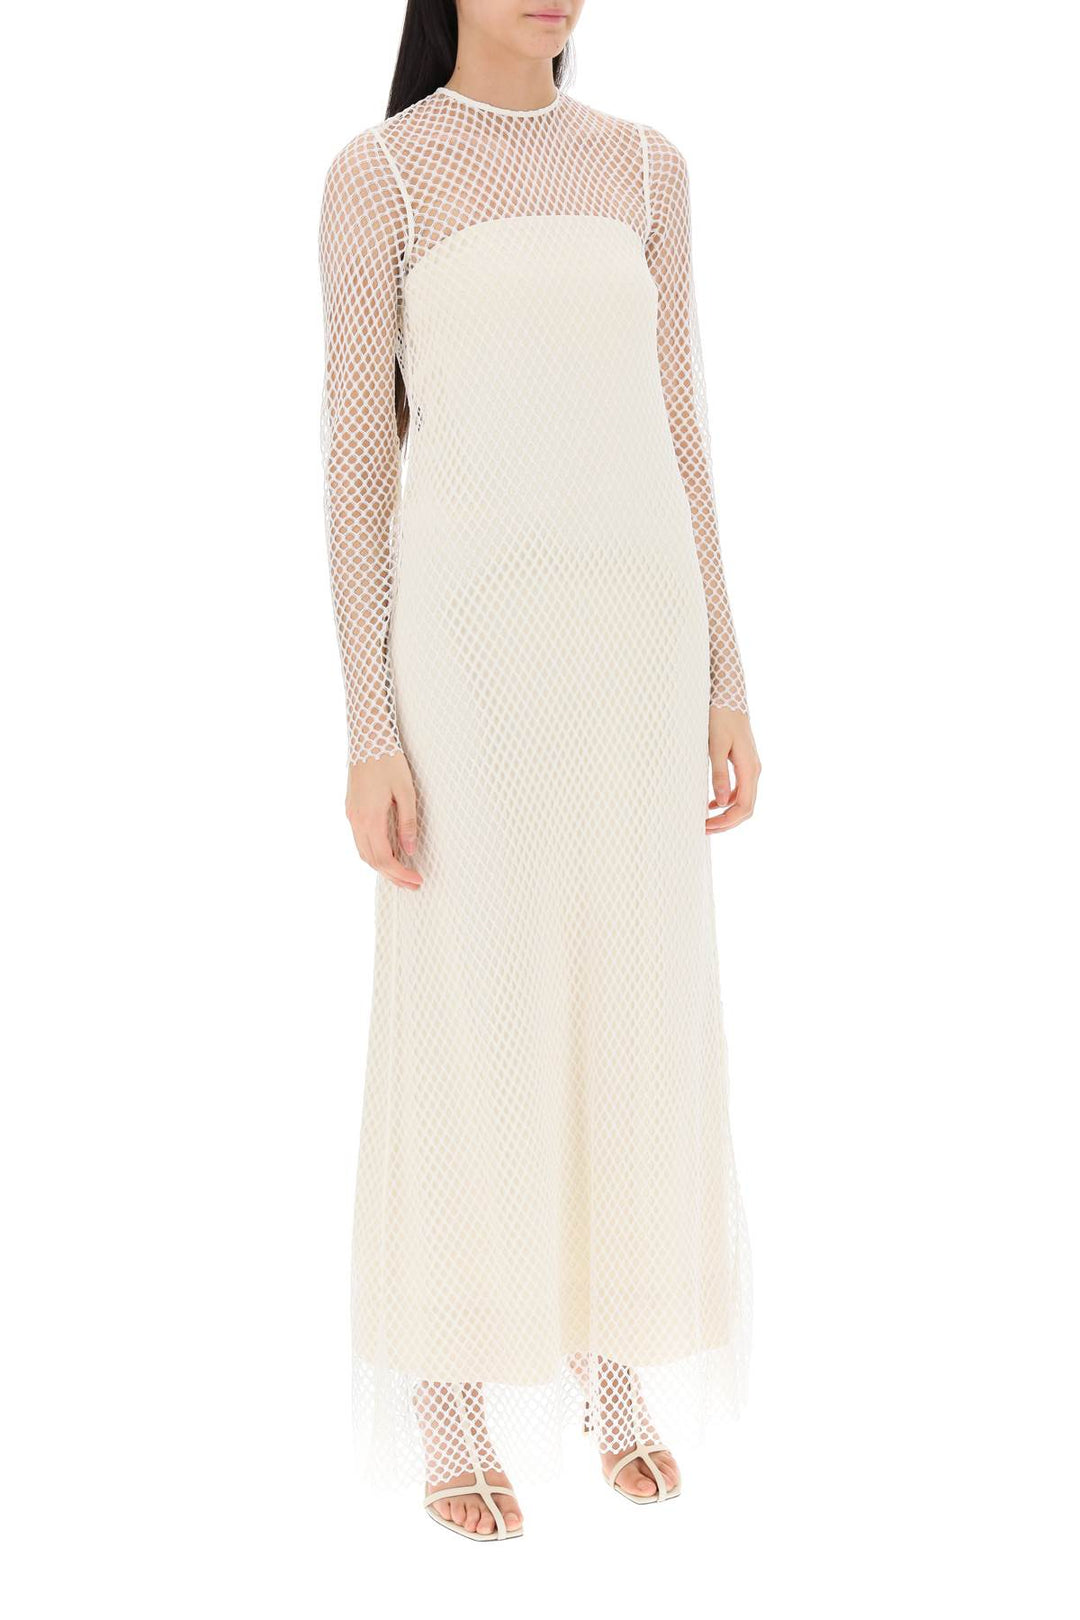 Toteme Layered Maxi Dress In Fishnet Lace   Bianco